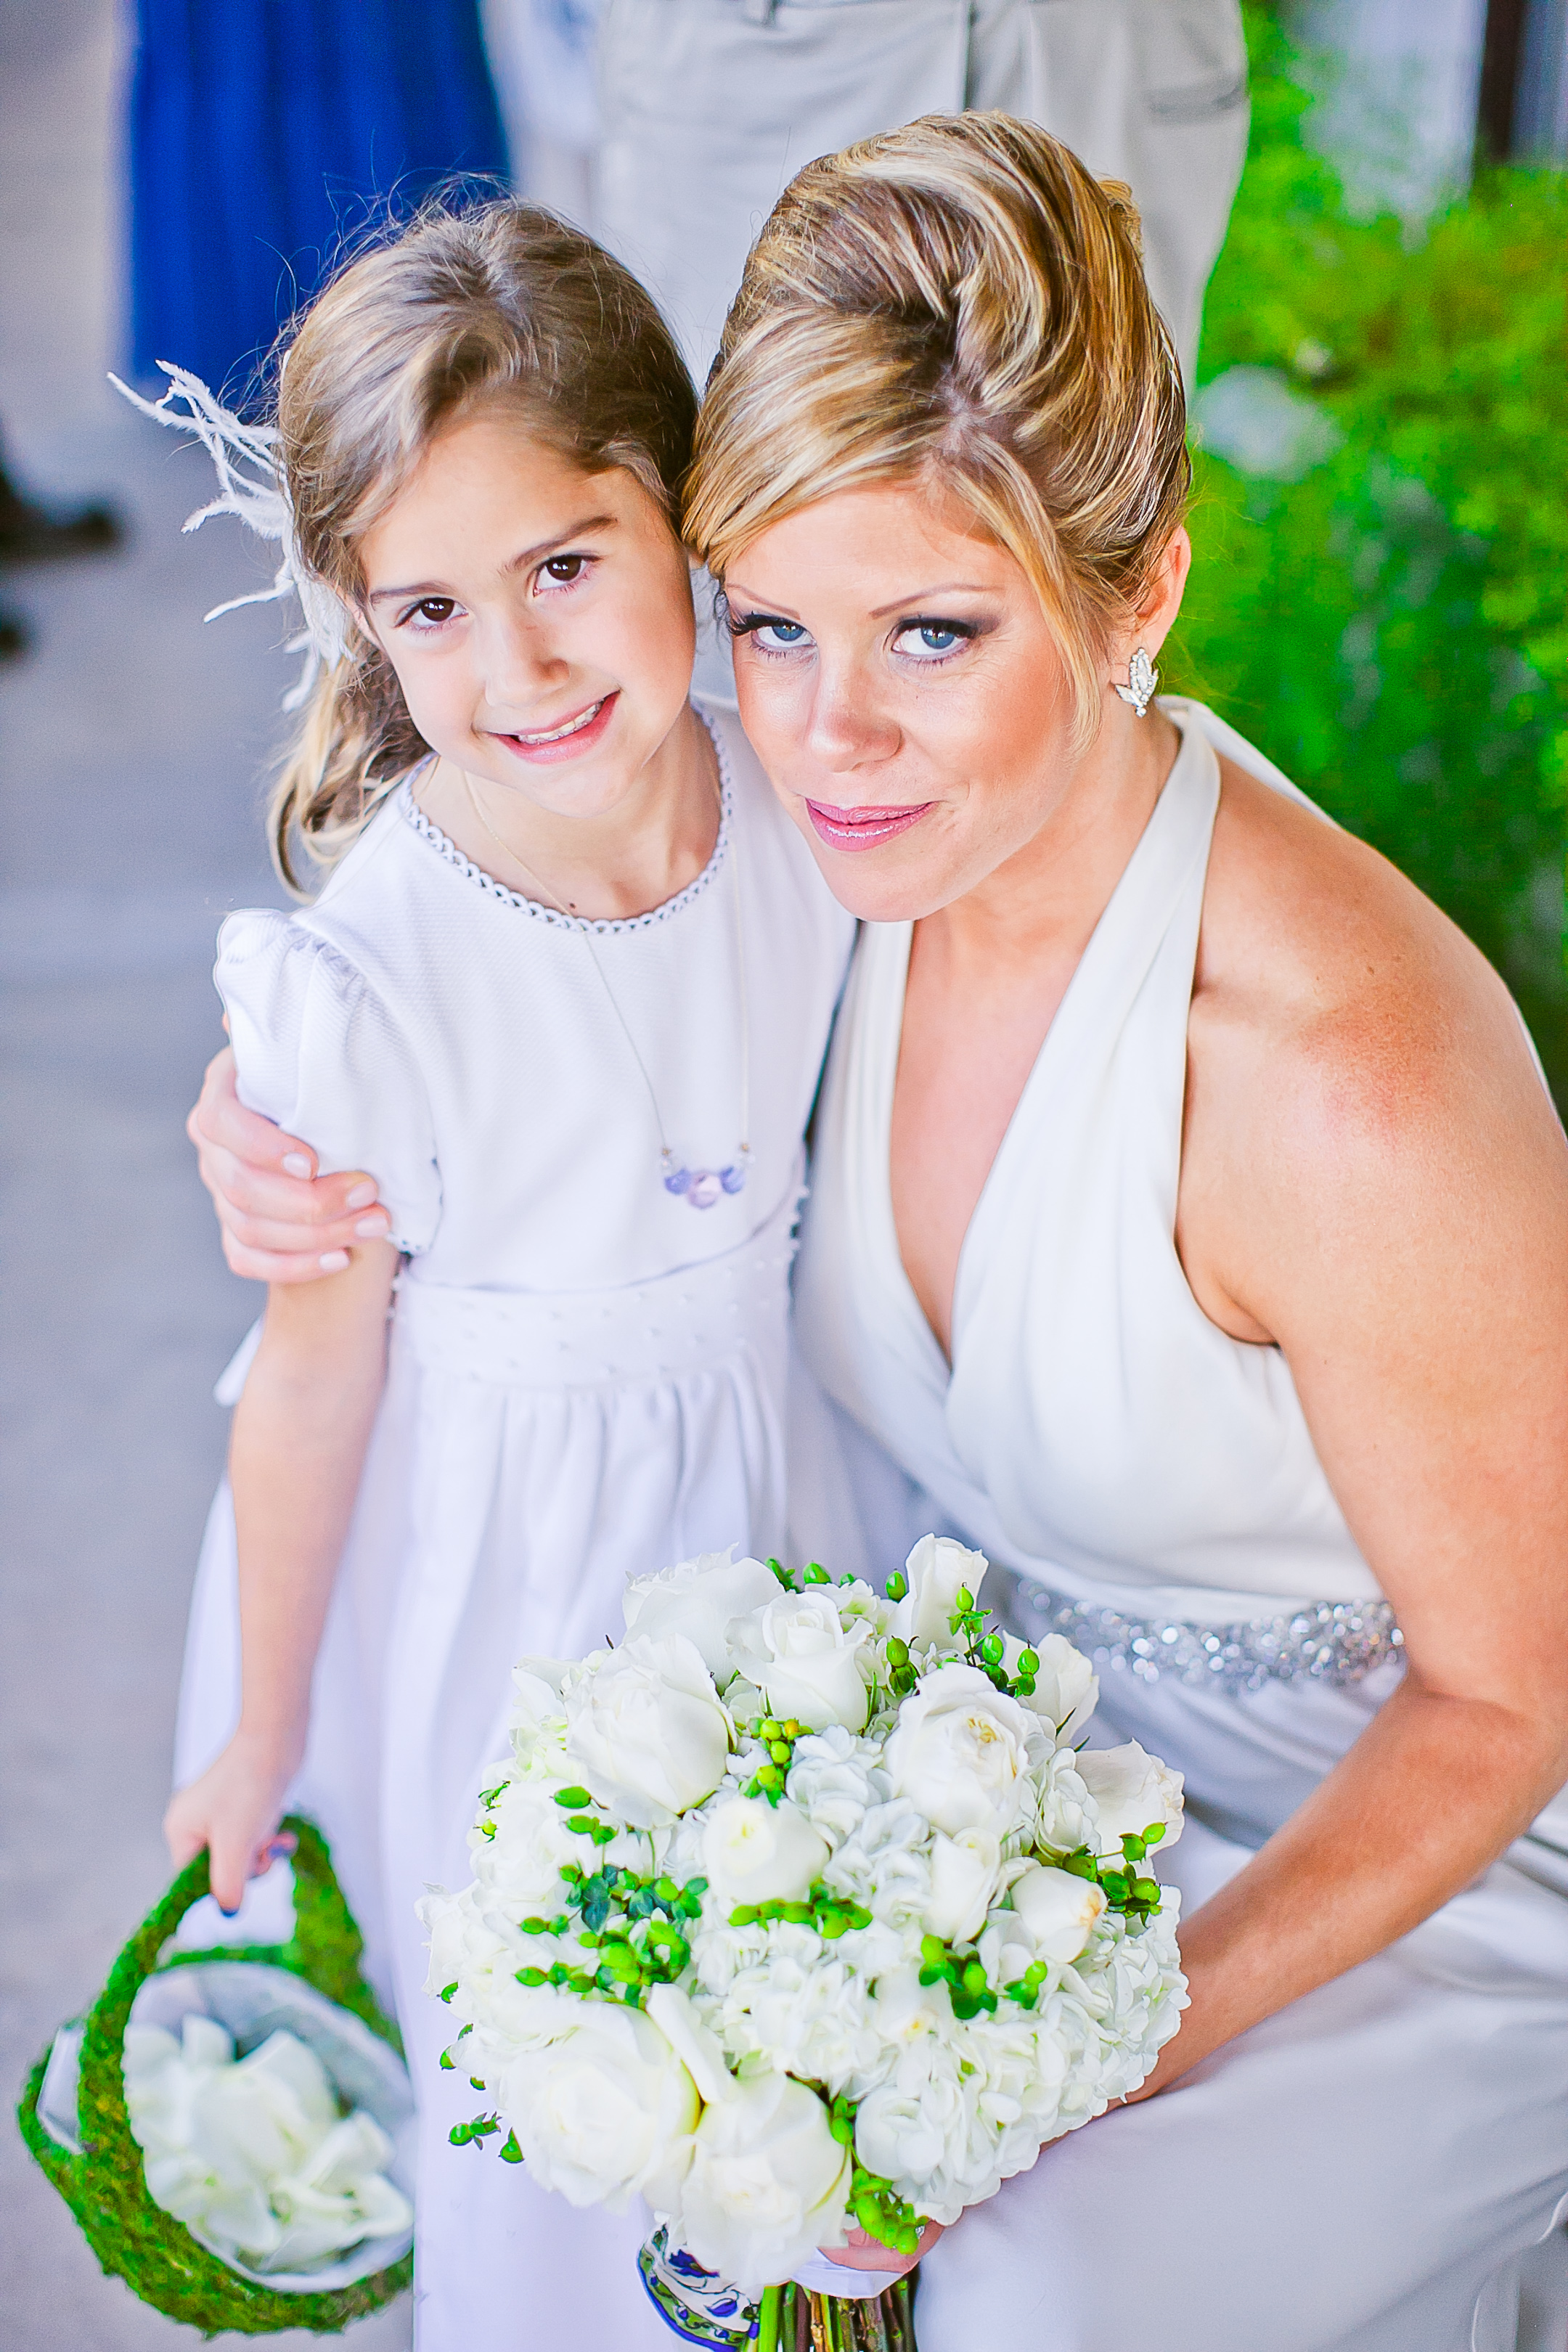 Flower girls are a source of wedding ideas.